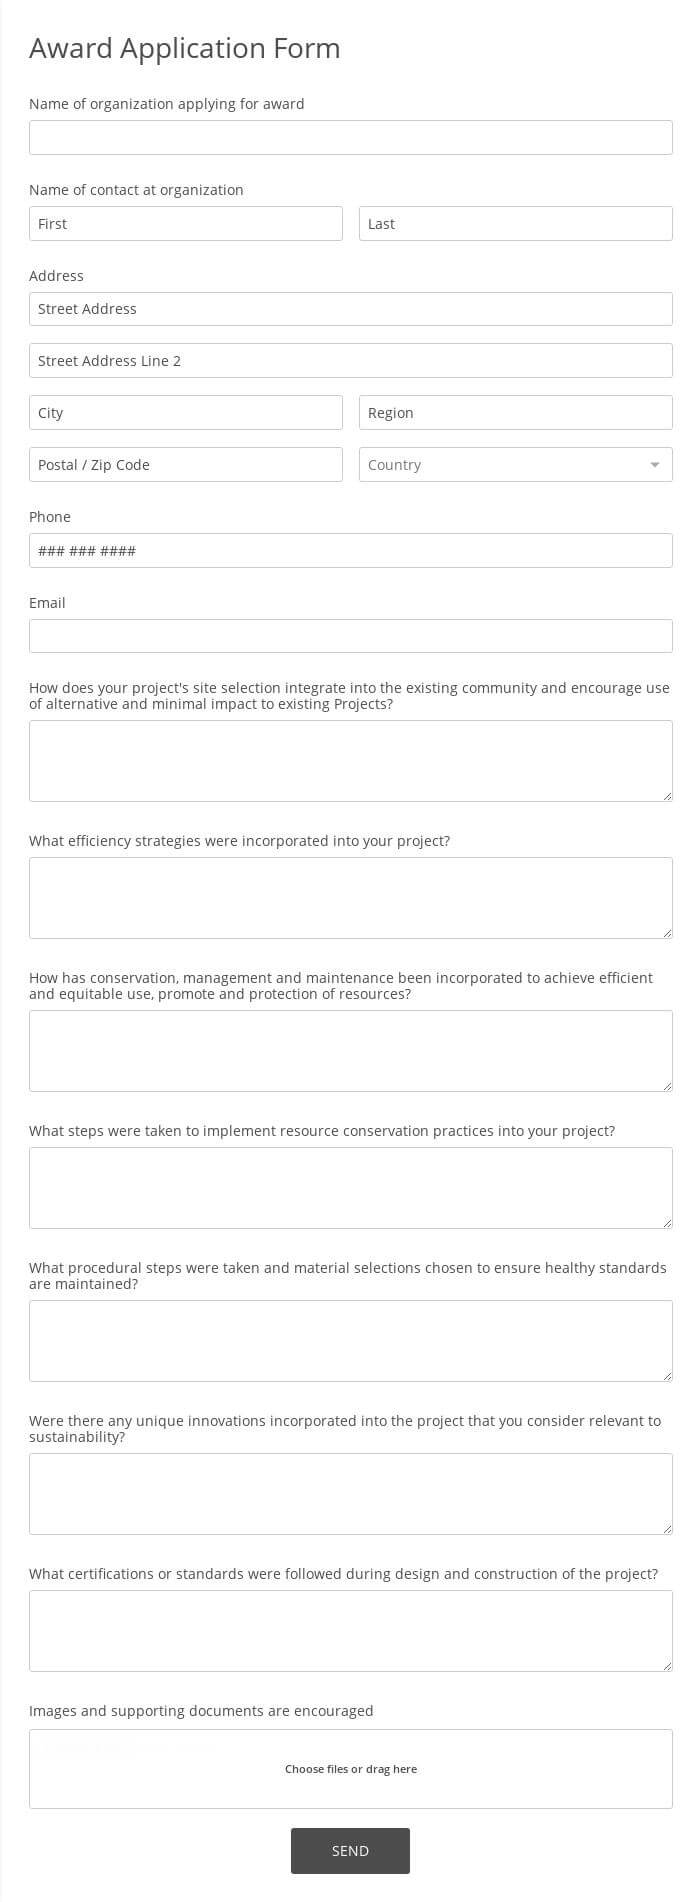 Event Form Templates Event Planning Forms 123 Form Builder